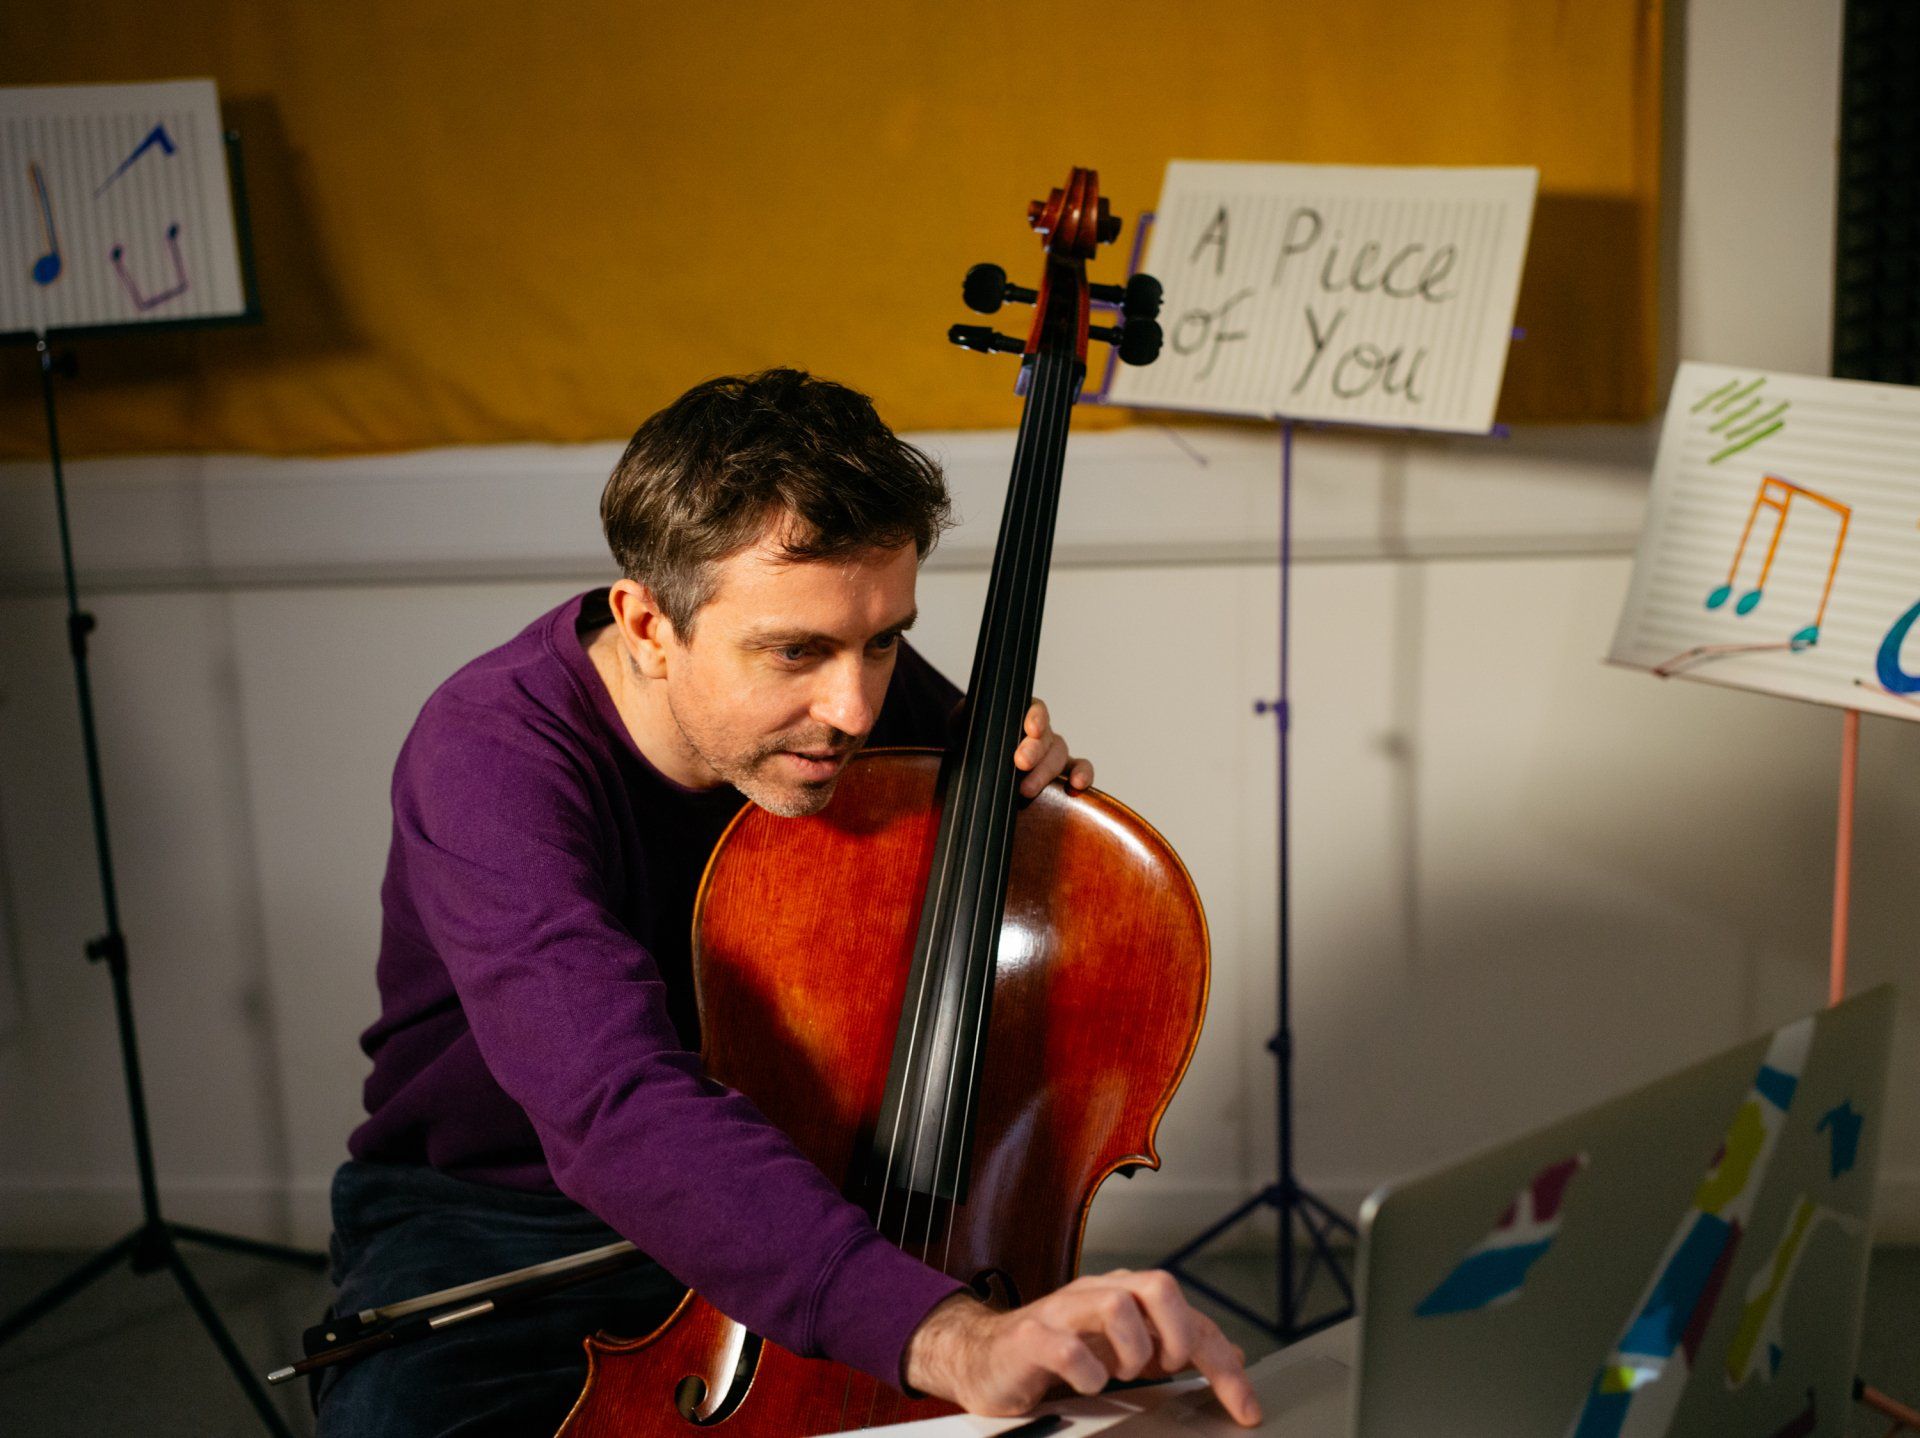 a man is playing a cello in front of a sign that says a piece of you